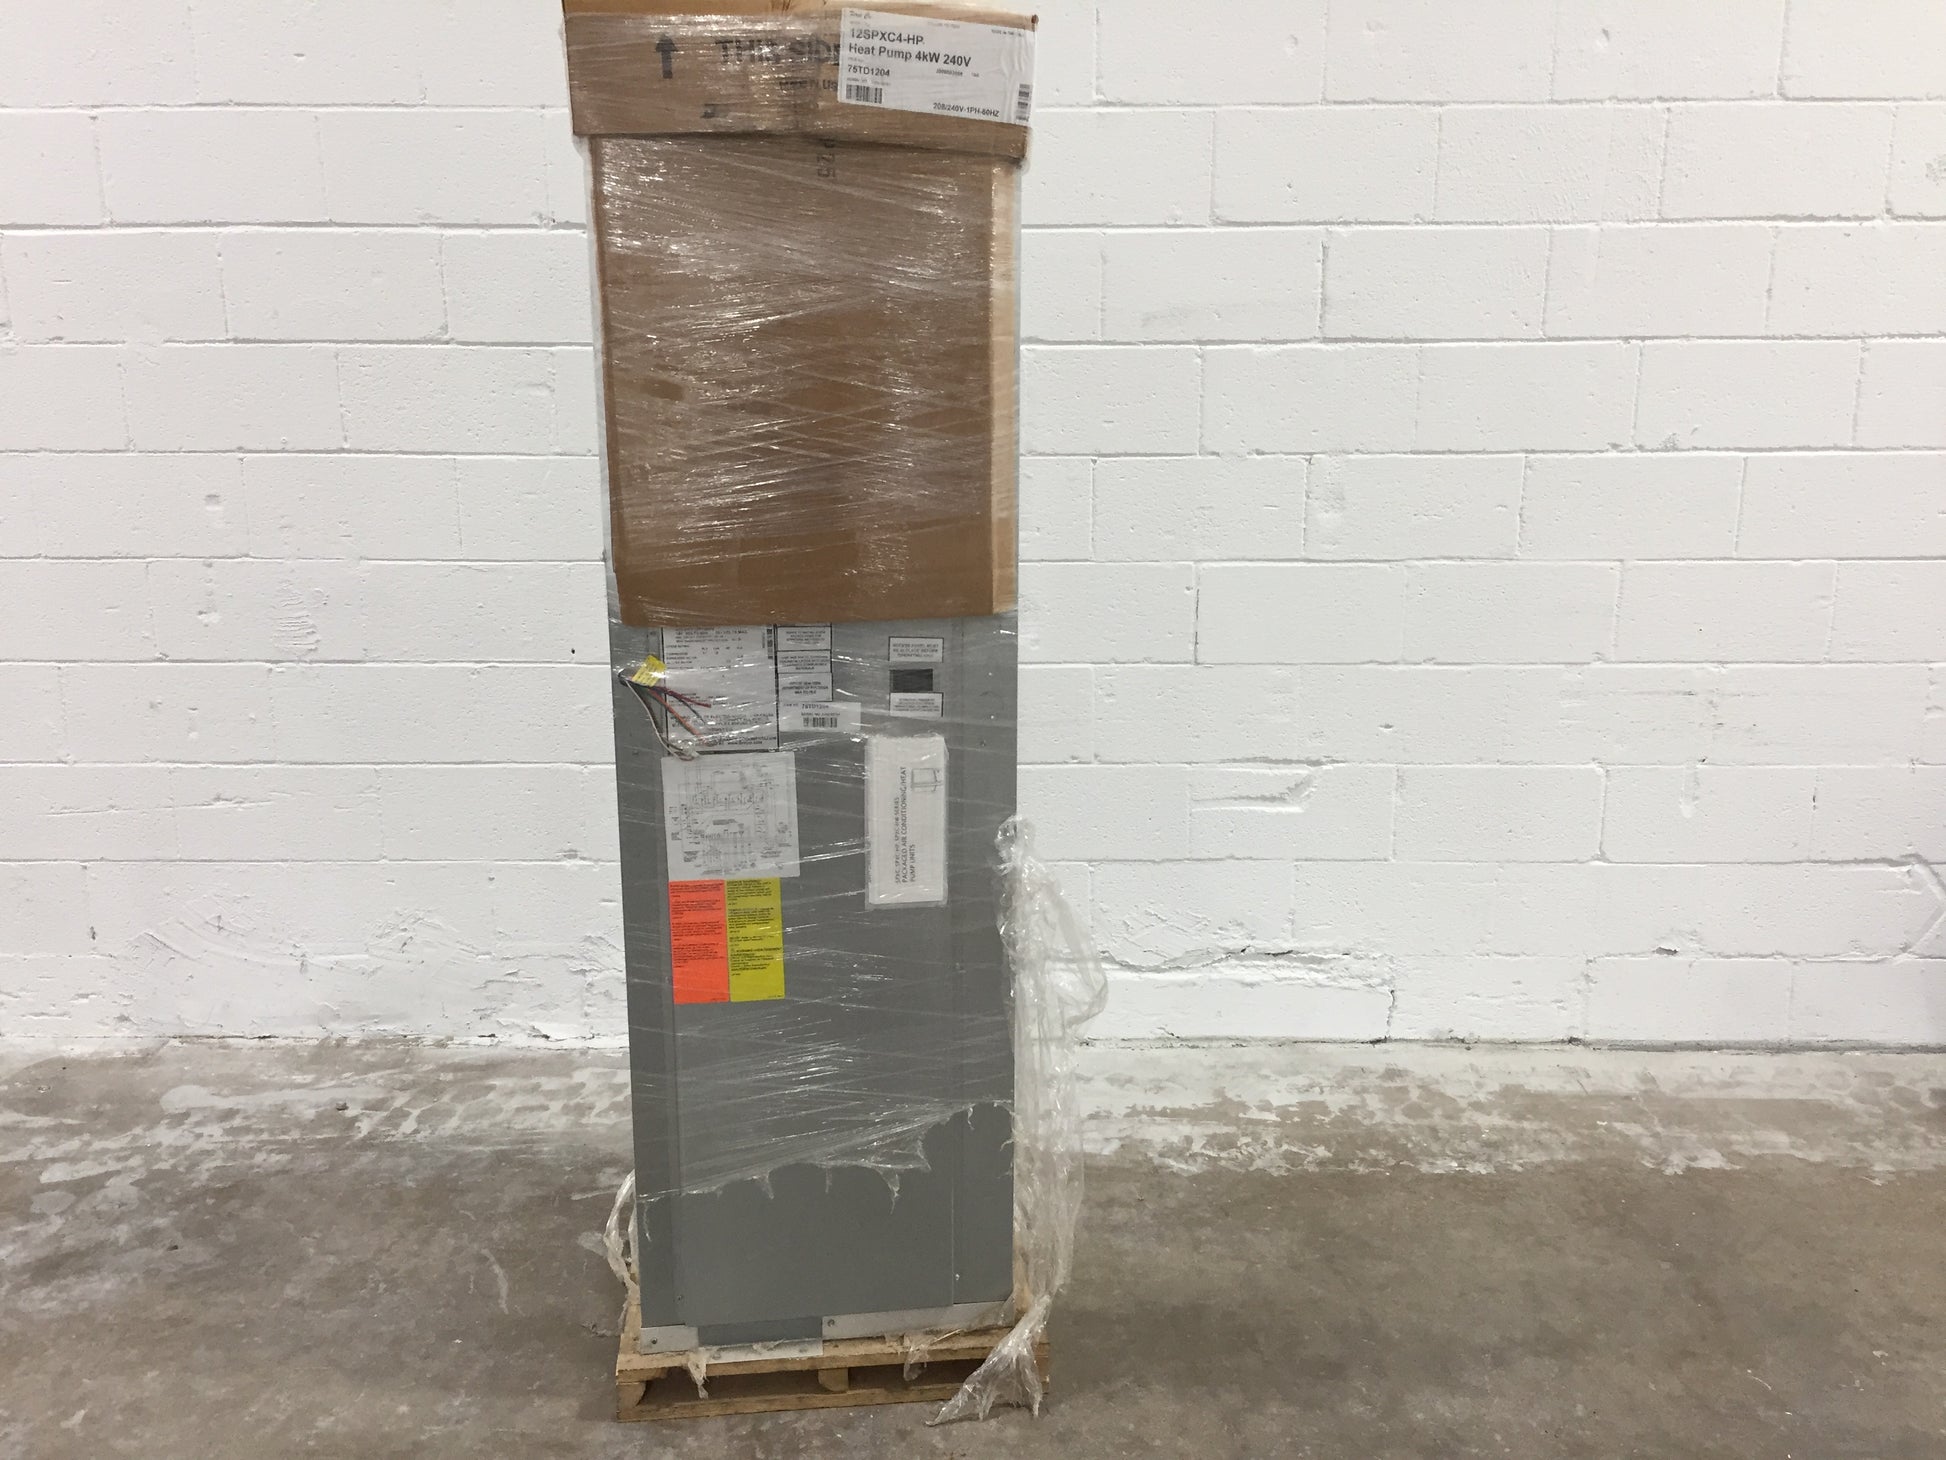 1 TON VERTICAL THROUGH-THE-WALL PACKAGED HEAT PUMP UNIT/W 4 KW, 208-230/60/1, EER: 11